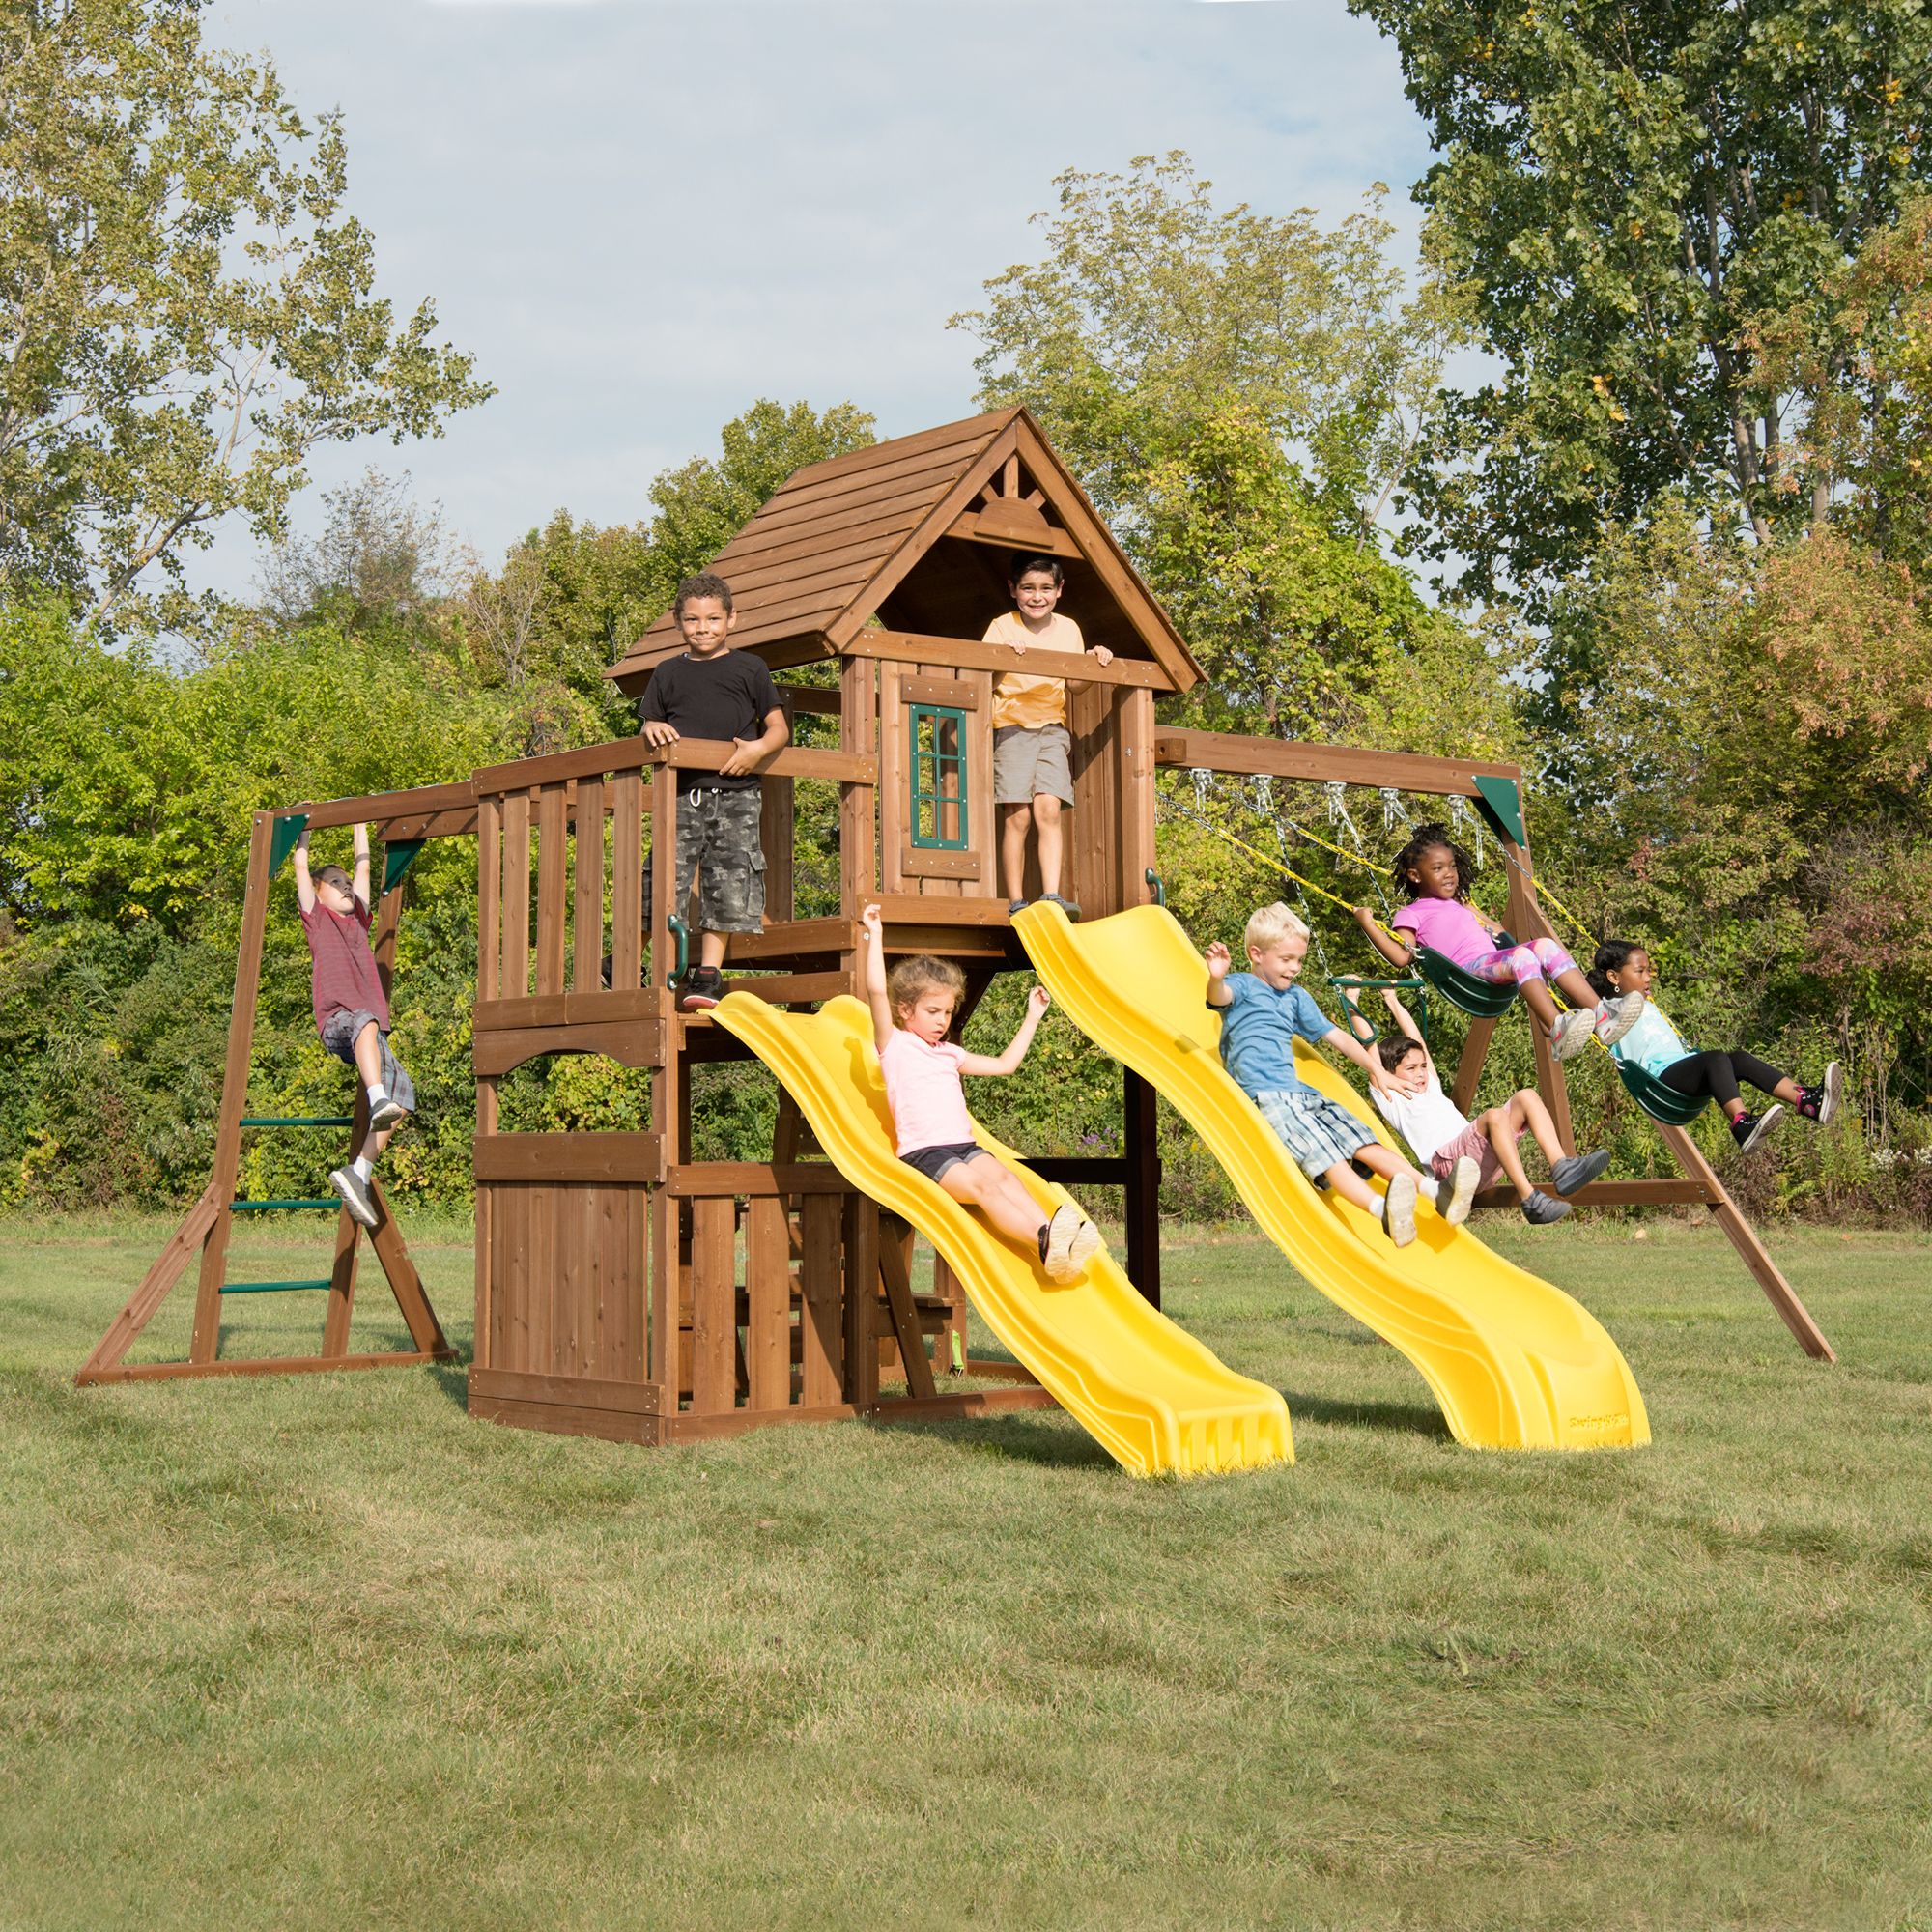 Swing-N-Slide Timberview Wooden Backyard Swing Set with Two Yellow Wave Slides, Wood Roof, Swings, and Monkey Bars - image 2 of 12